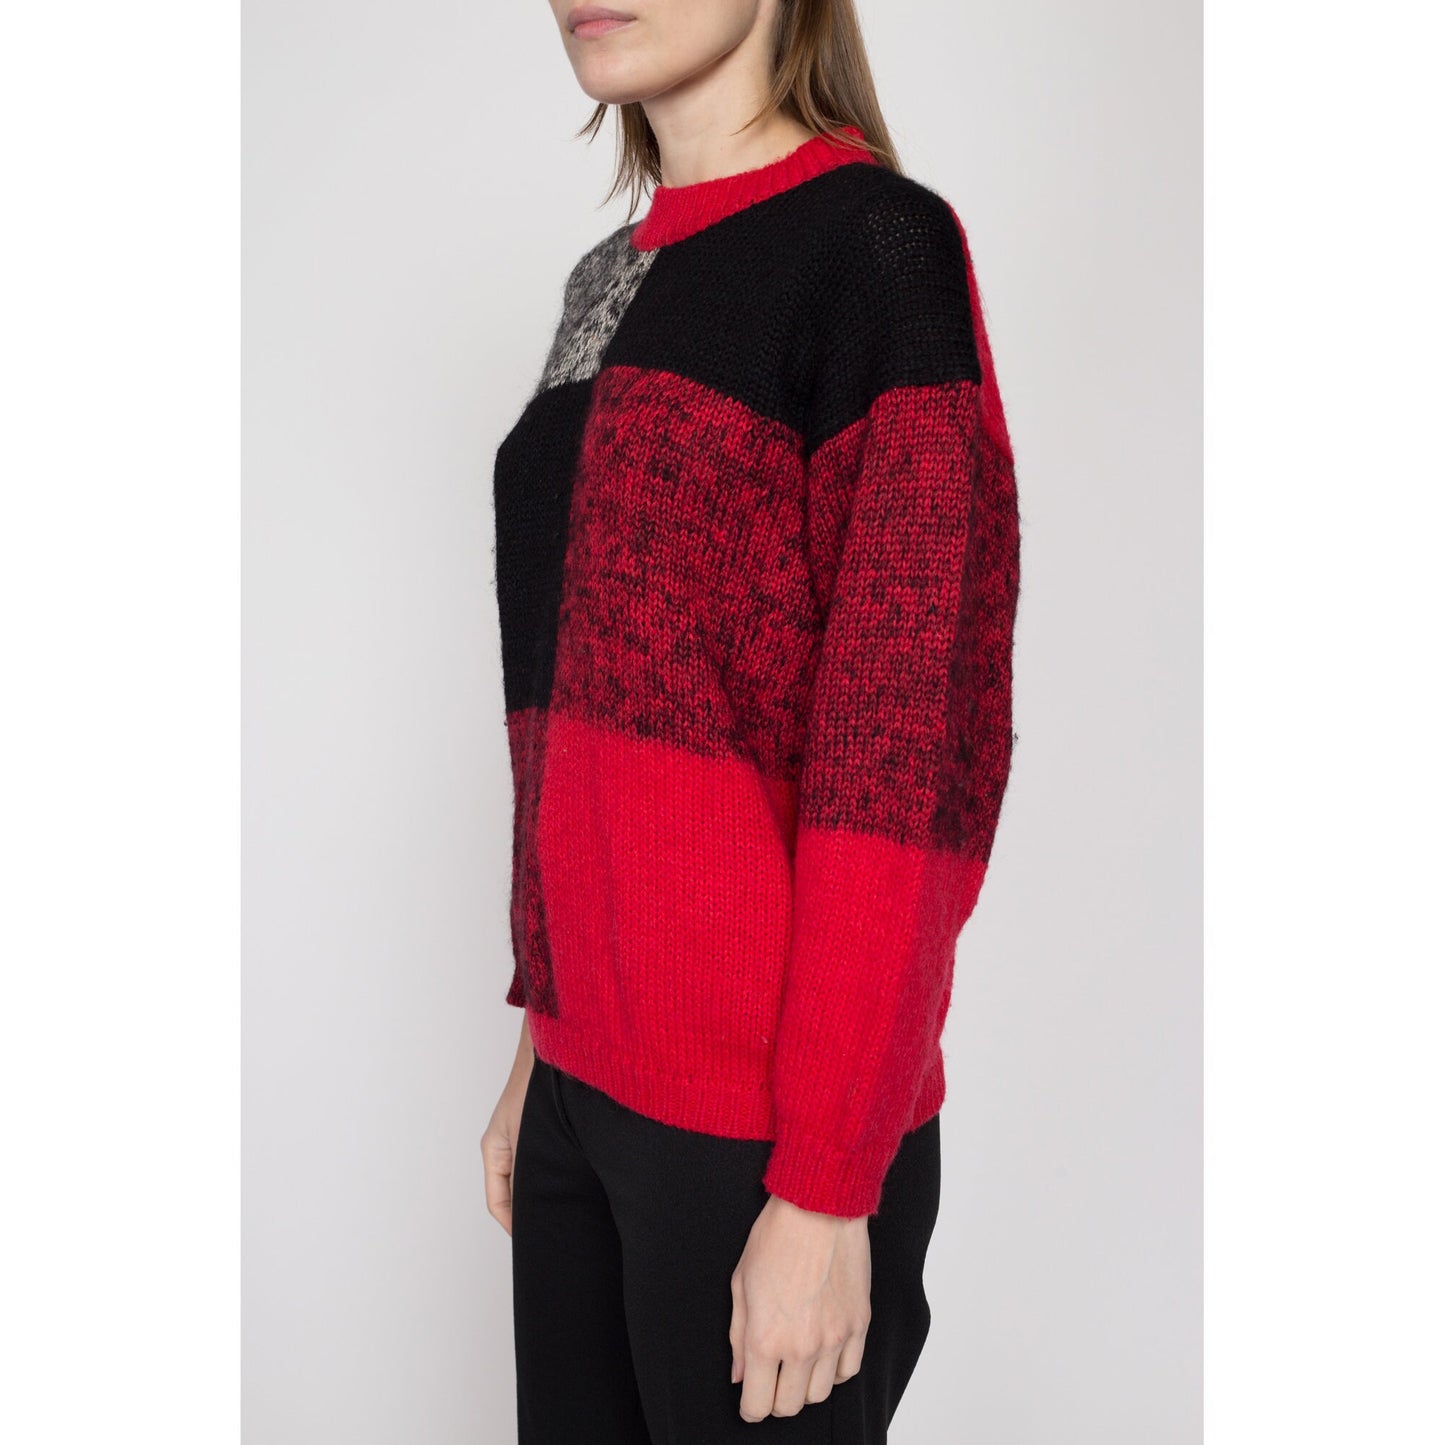 Small 80s Red & Black Color Block Sweater | Vintage Wool Blend Knit Pullover